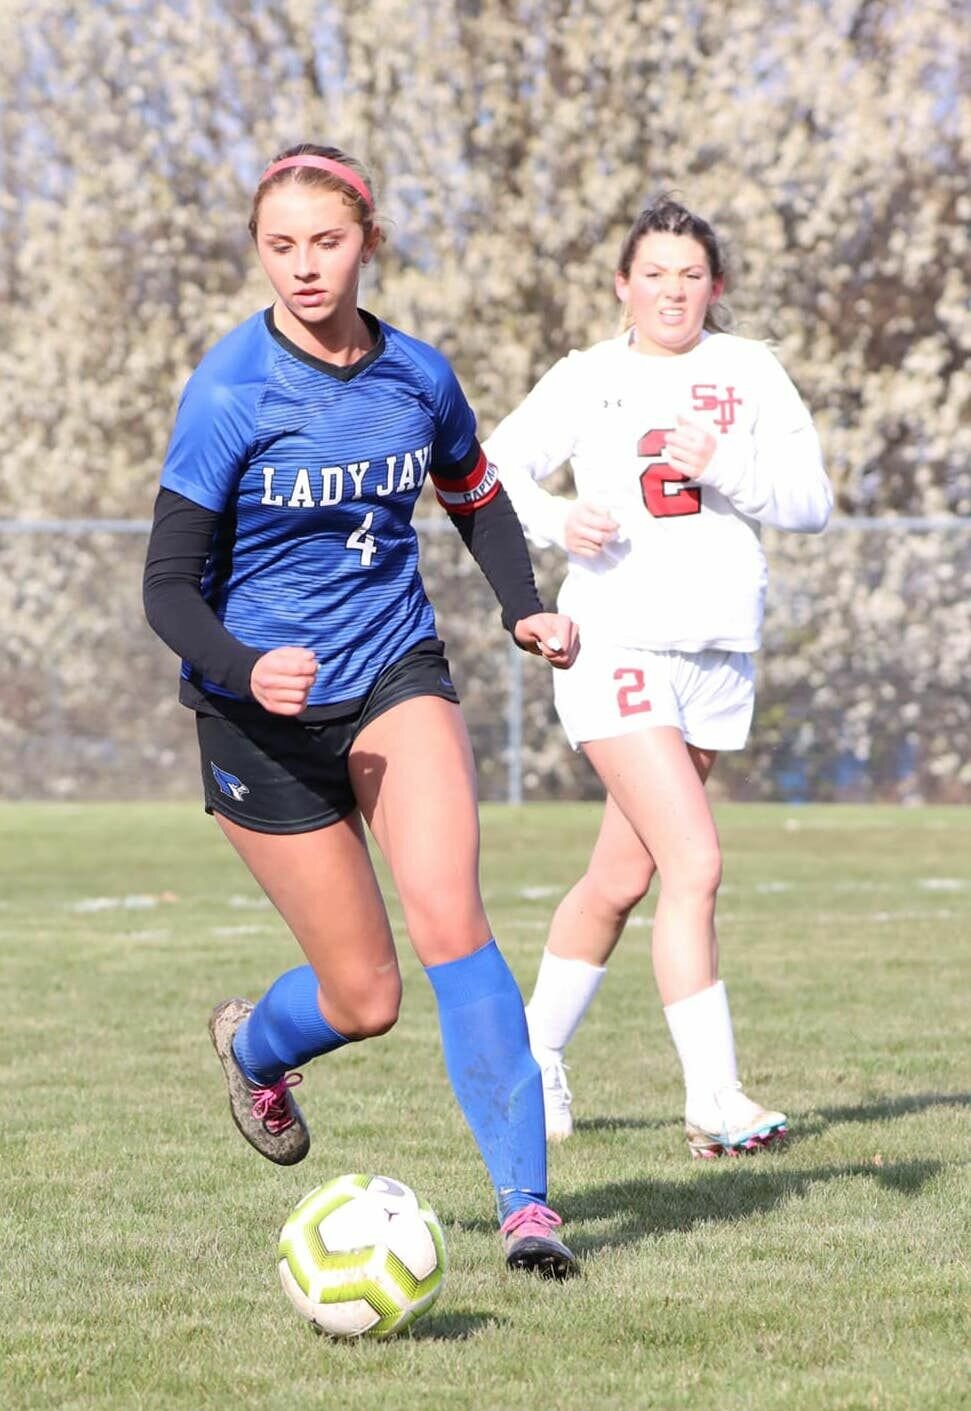 Senior Riley Manary, pictured running downfield, scored a goal for the Blue Jays, helping them win against St. James with a final score of 8-0.